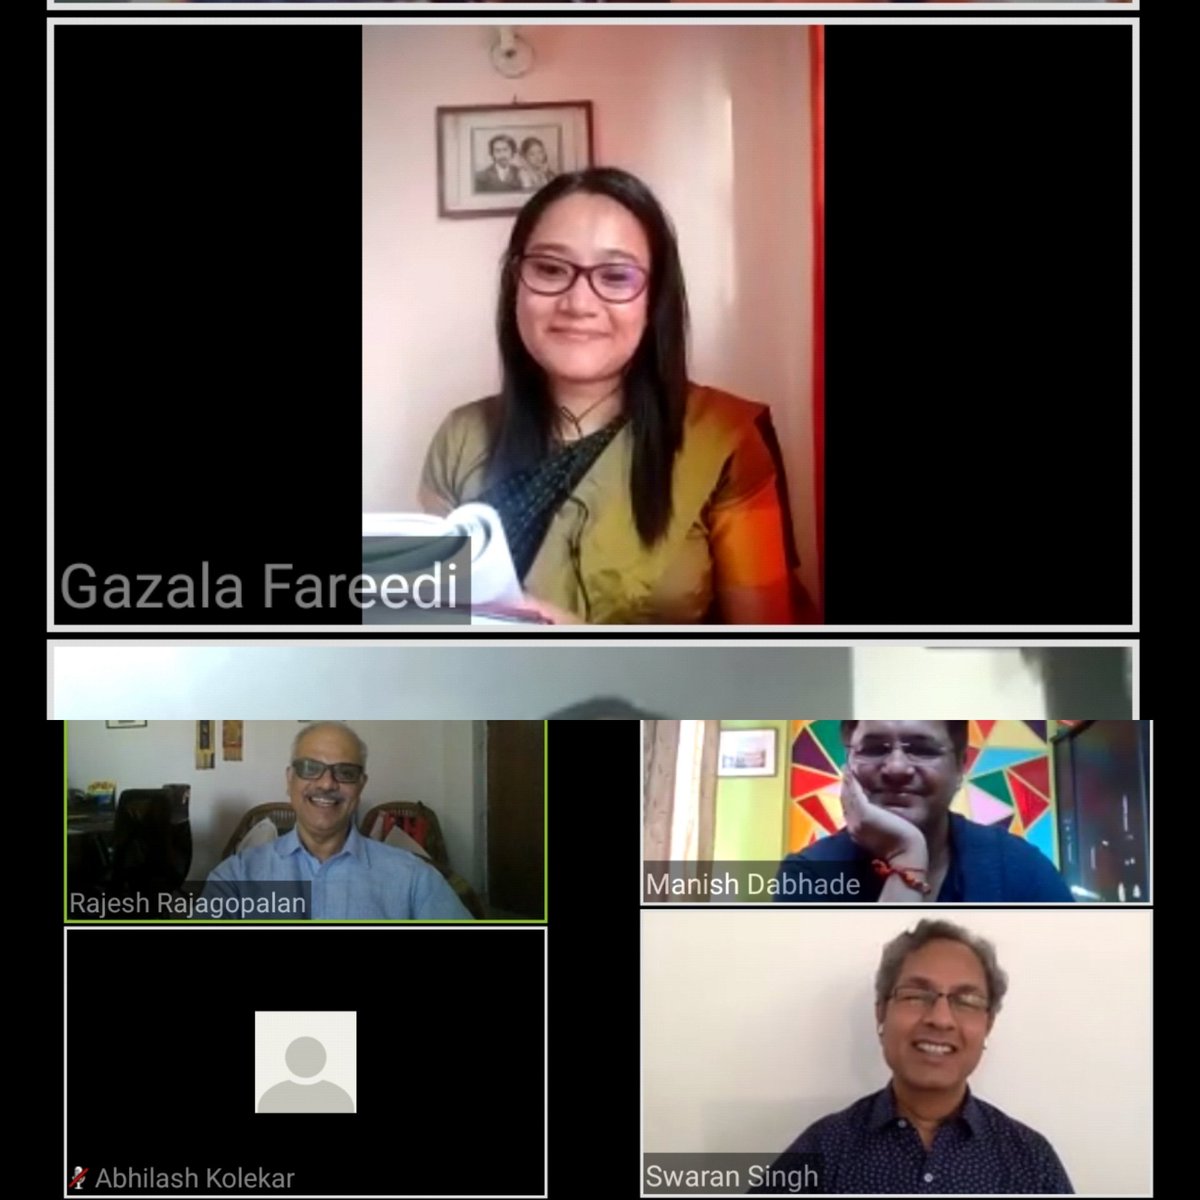 So happy to share the news that my friend @GazalaFareedi has successfully defended her thesis, 'Mediatization of 
Diplomacy: A Case Study of India'. She is now Dr. Gazala Fareedi! Abbu, ammi, Fareedi family and all your friends are very proud of you Gaz! ❤️❤️ Congratulations!! 💕